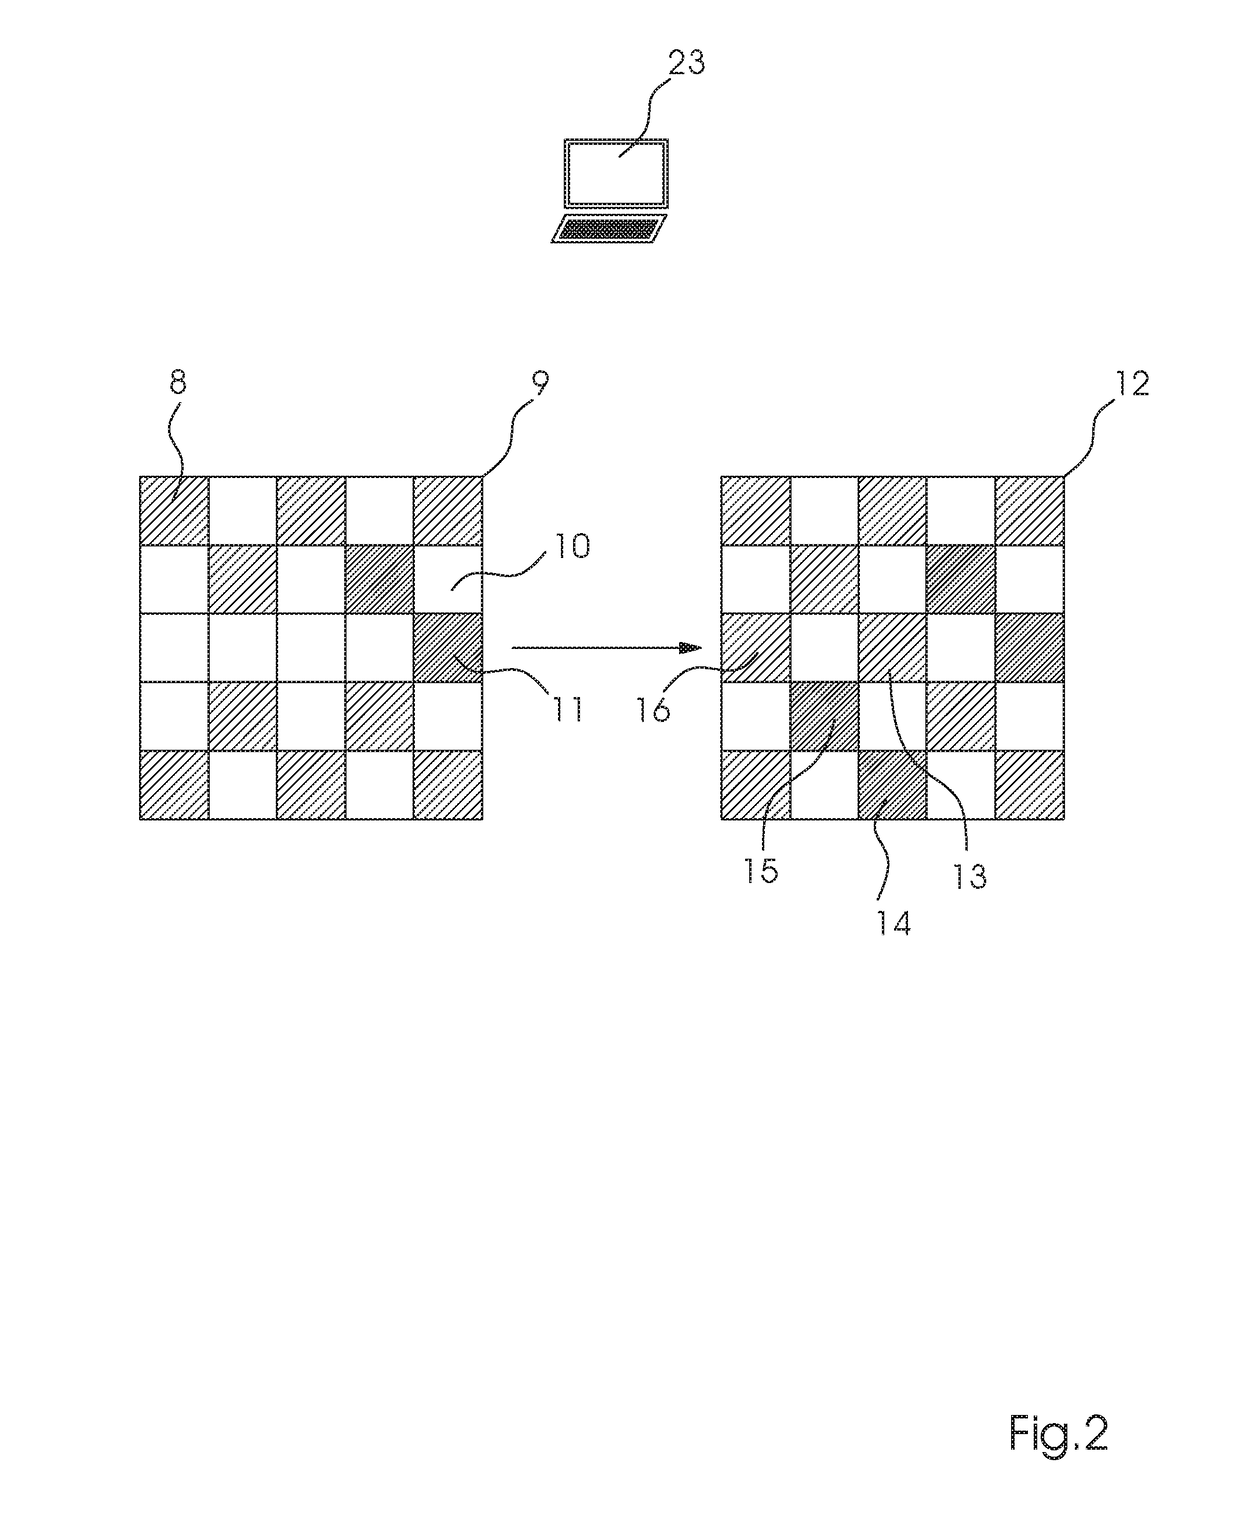 Method for compensating for tone value fluctuation in an inkjet printing machine